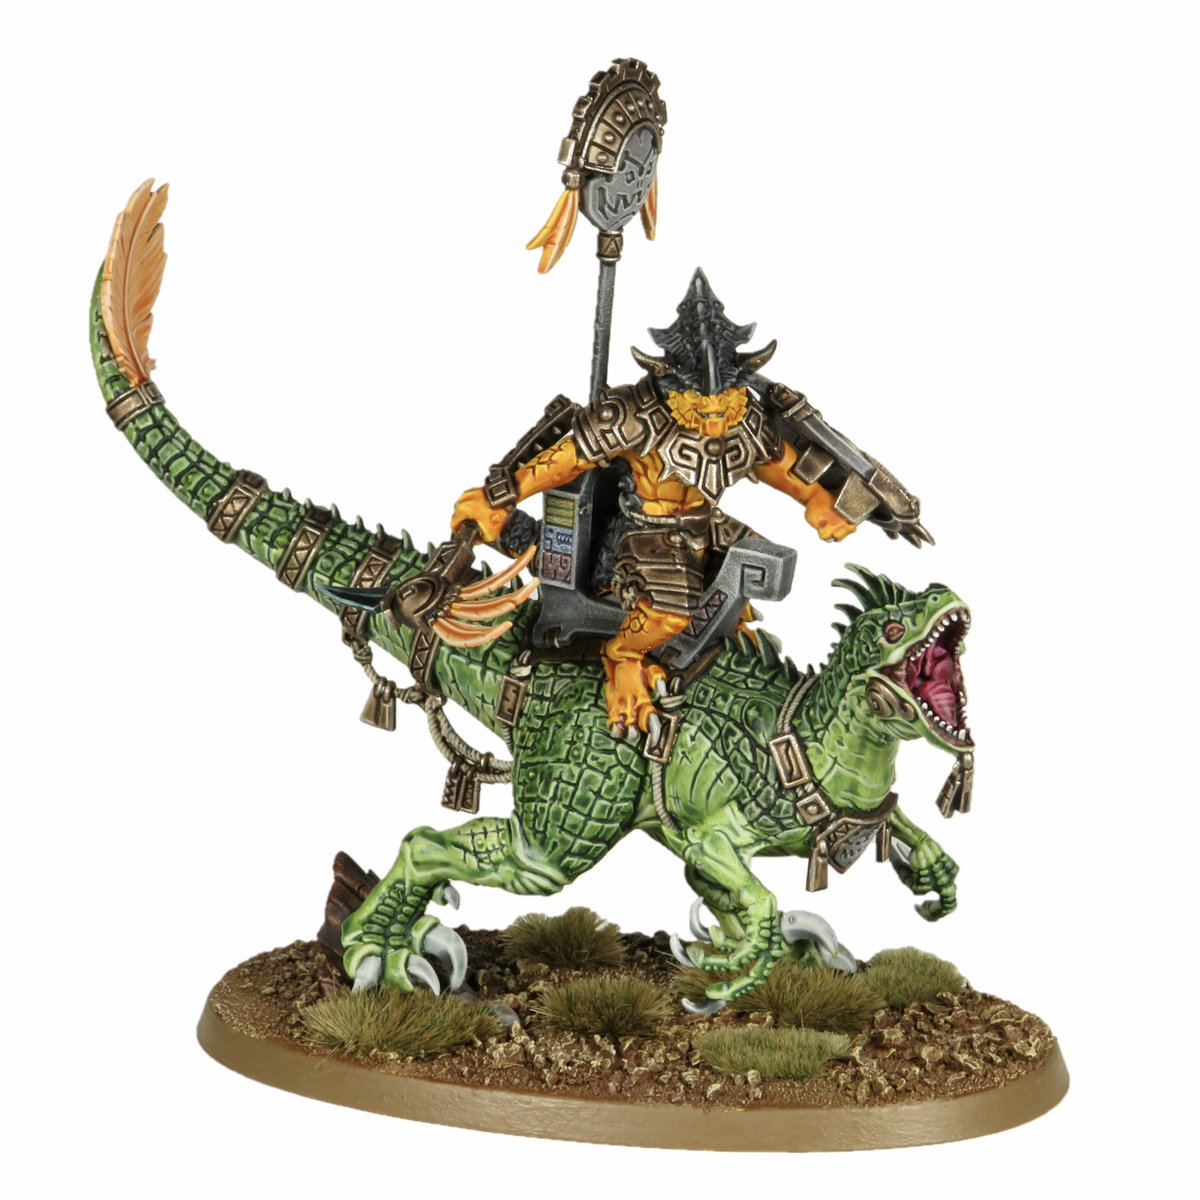 Merry Seraphon Day!
Here’s a Saurus Scar Veteran on Aggradon @warhammer sent my way. Had to paint this one the moment it hit my doorstep (and I got over covid). Totally recommend for any hobbyist, even if you’re not collecting Seraphon. Such a centrepiece kit.
#WarhammerCommunity